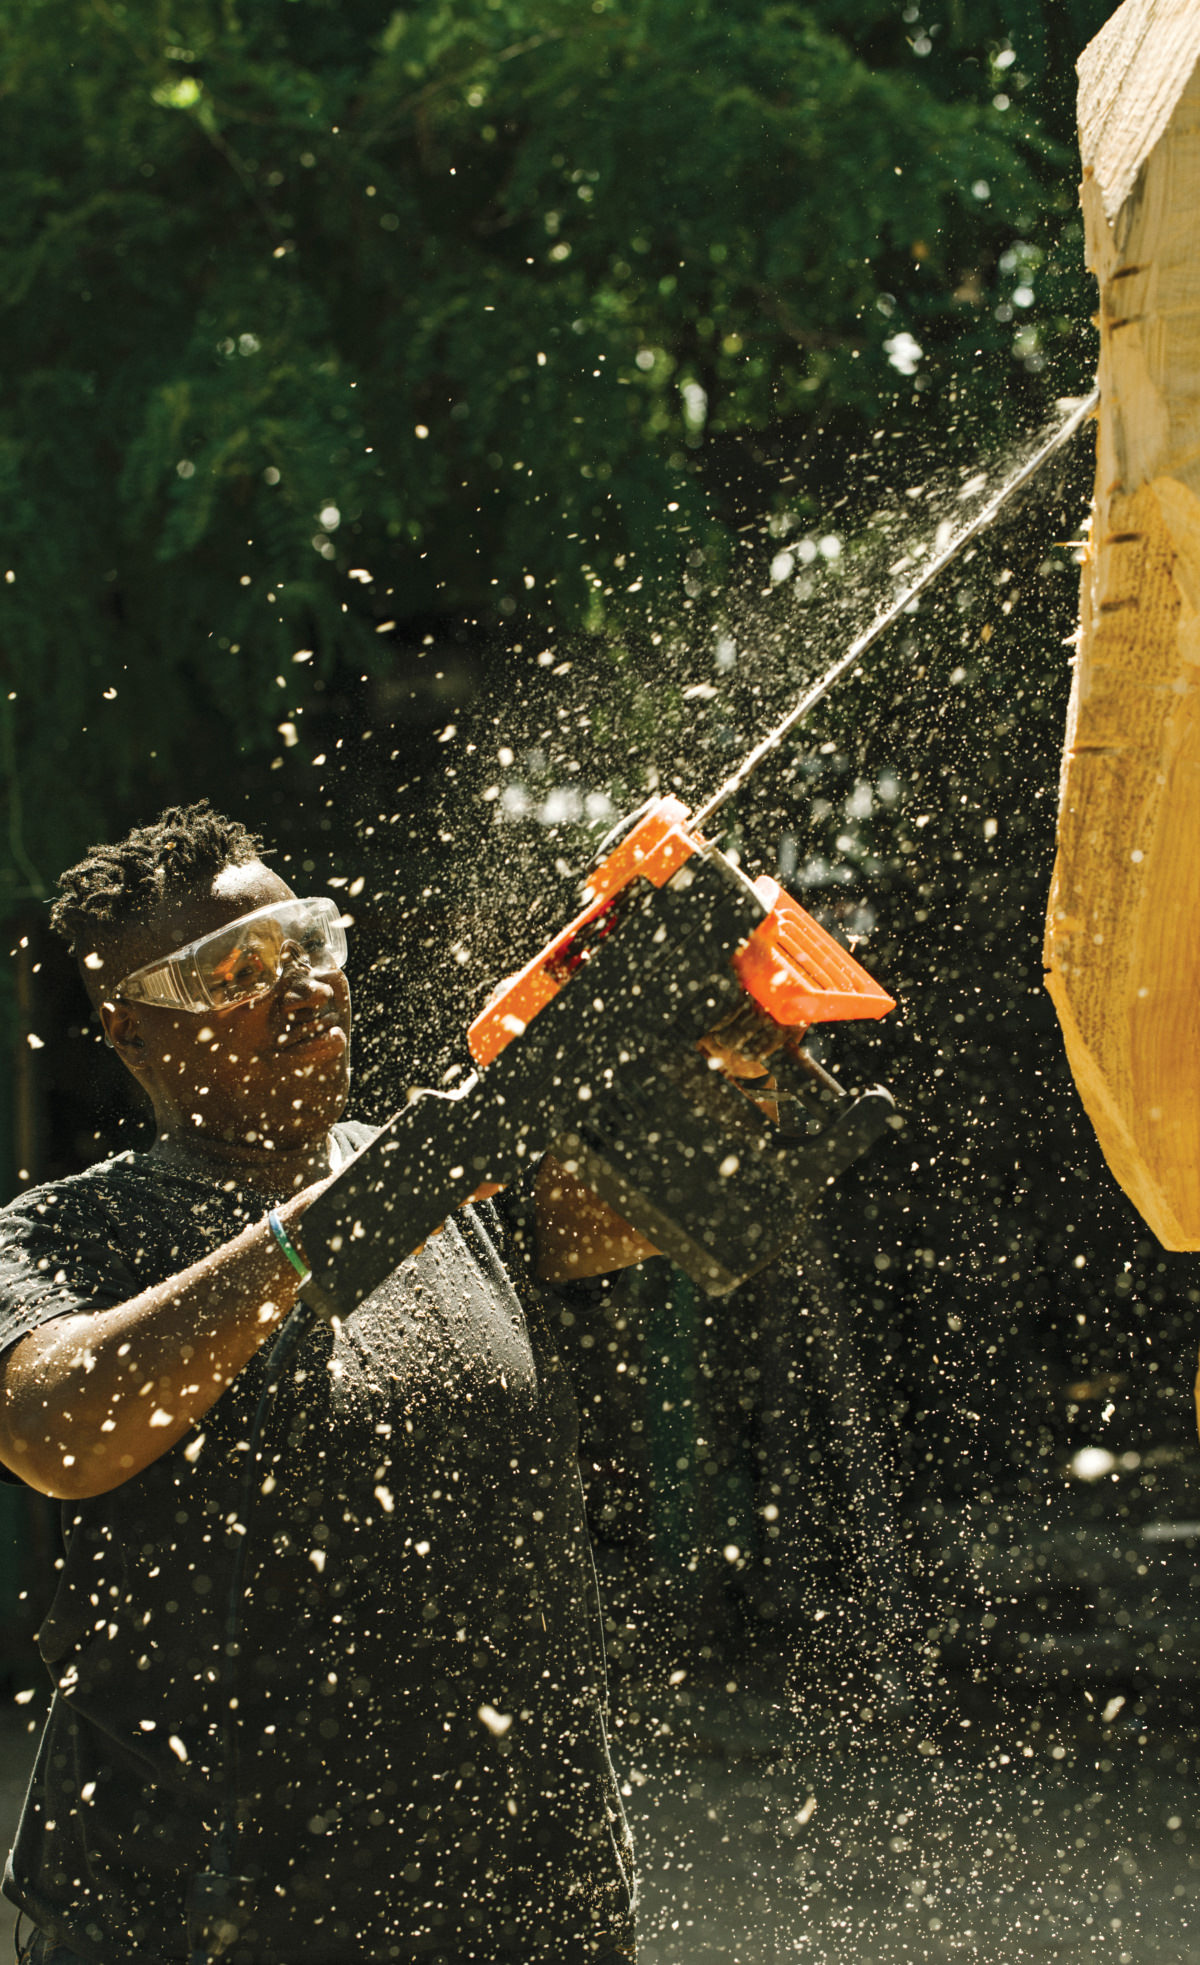 A black woman wearing safety goggles, carving a piece of wood using a chainsaw